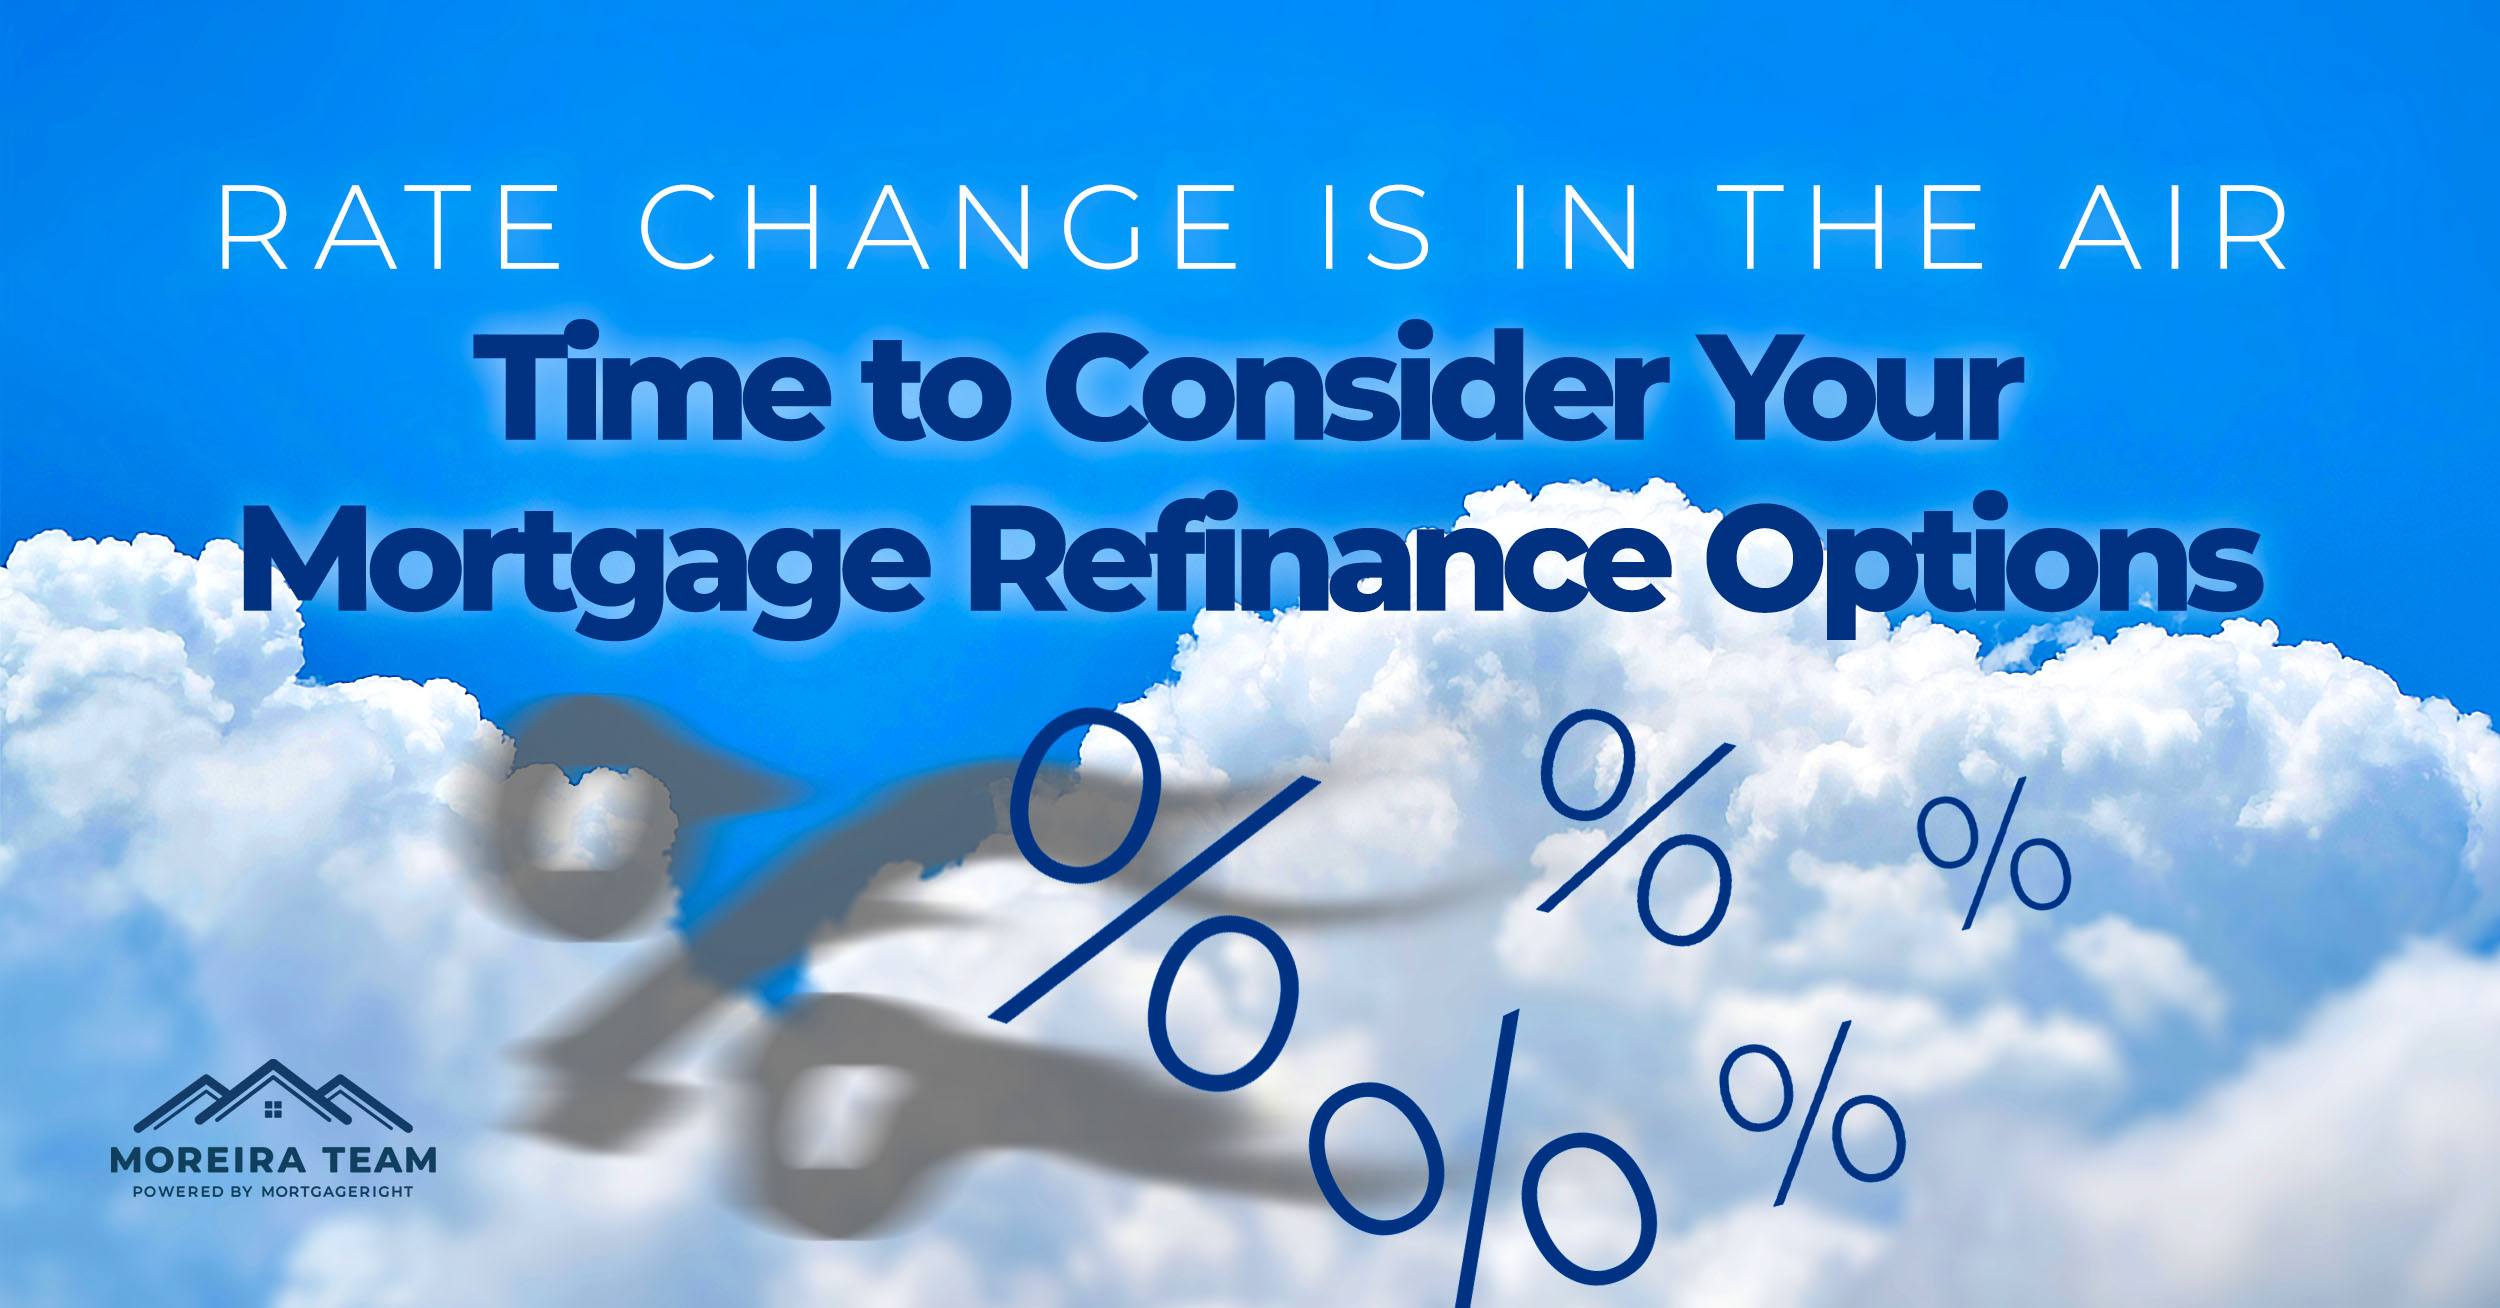 rate change is in the air, refinance time is now